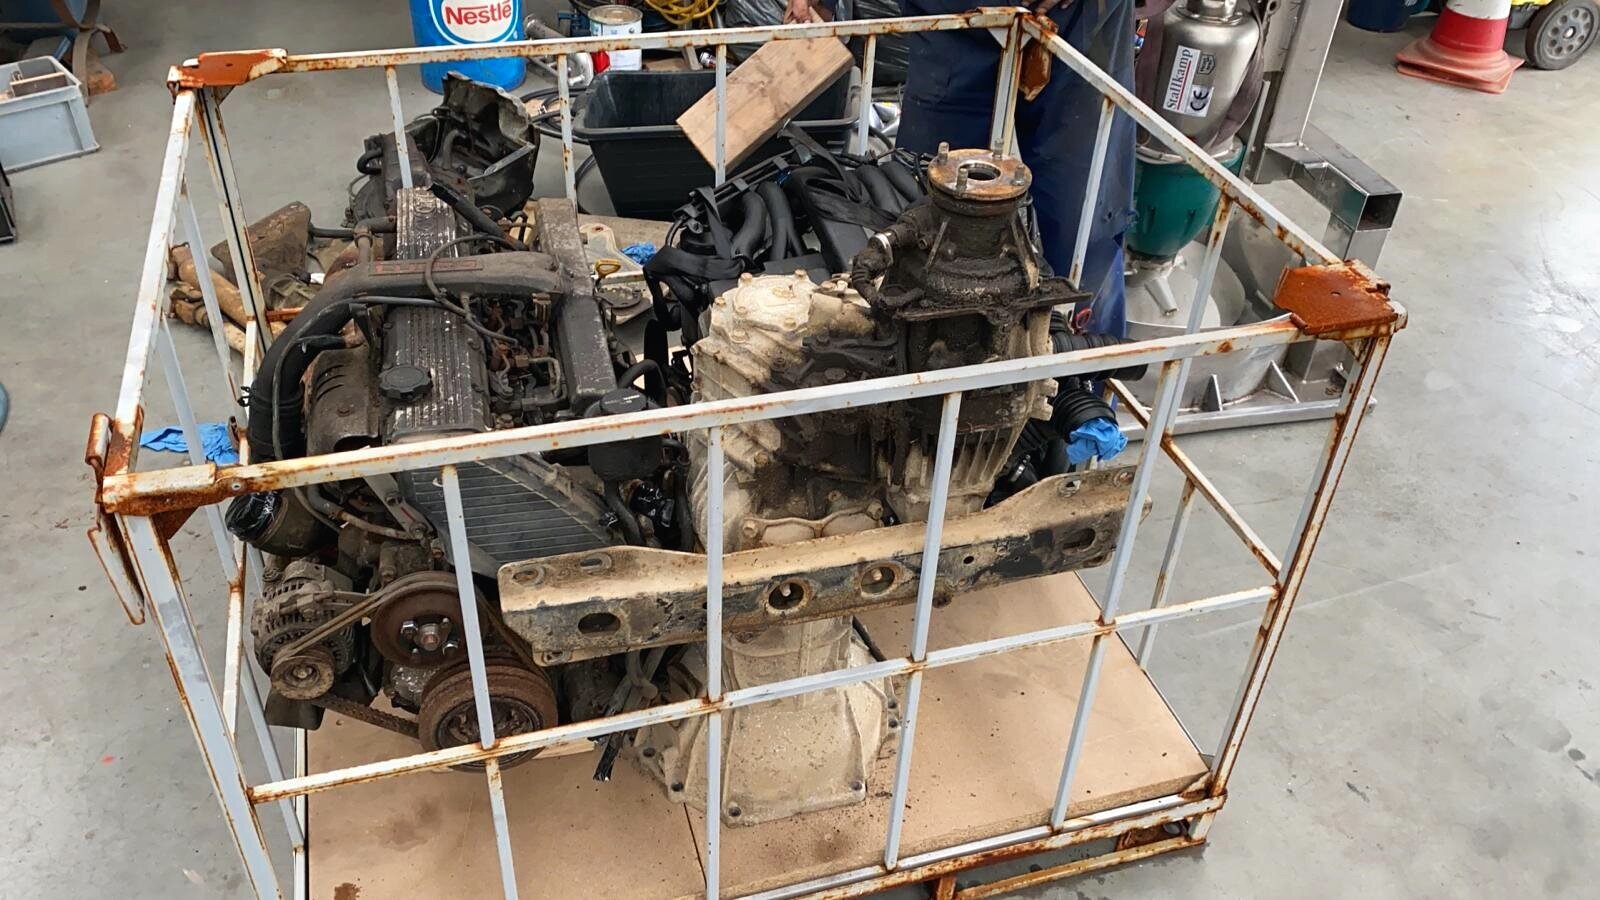 Now, that's a crate engine.